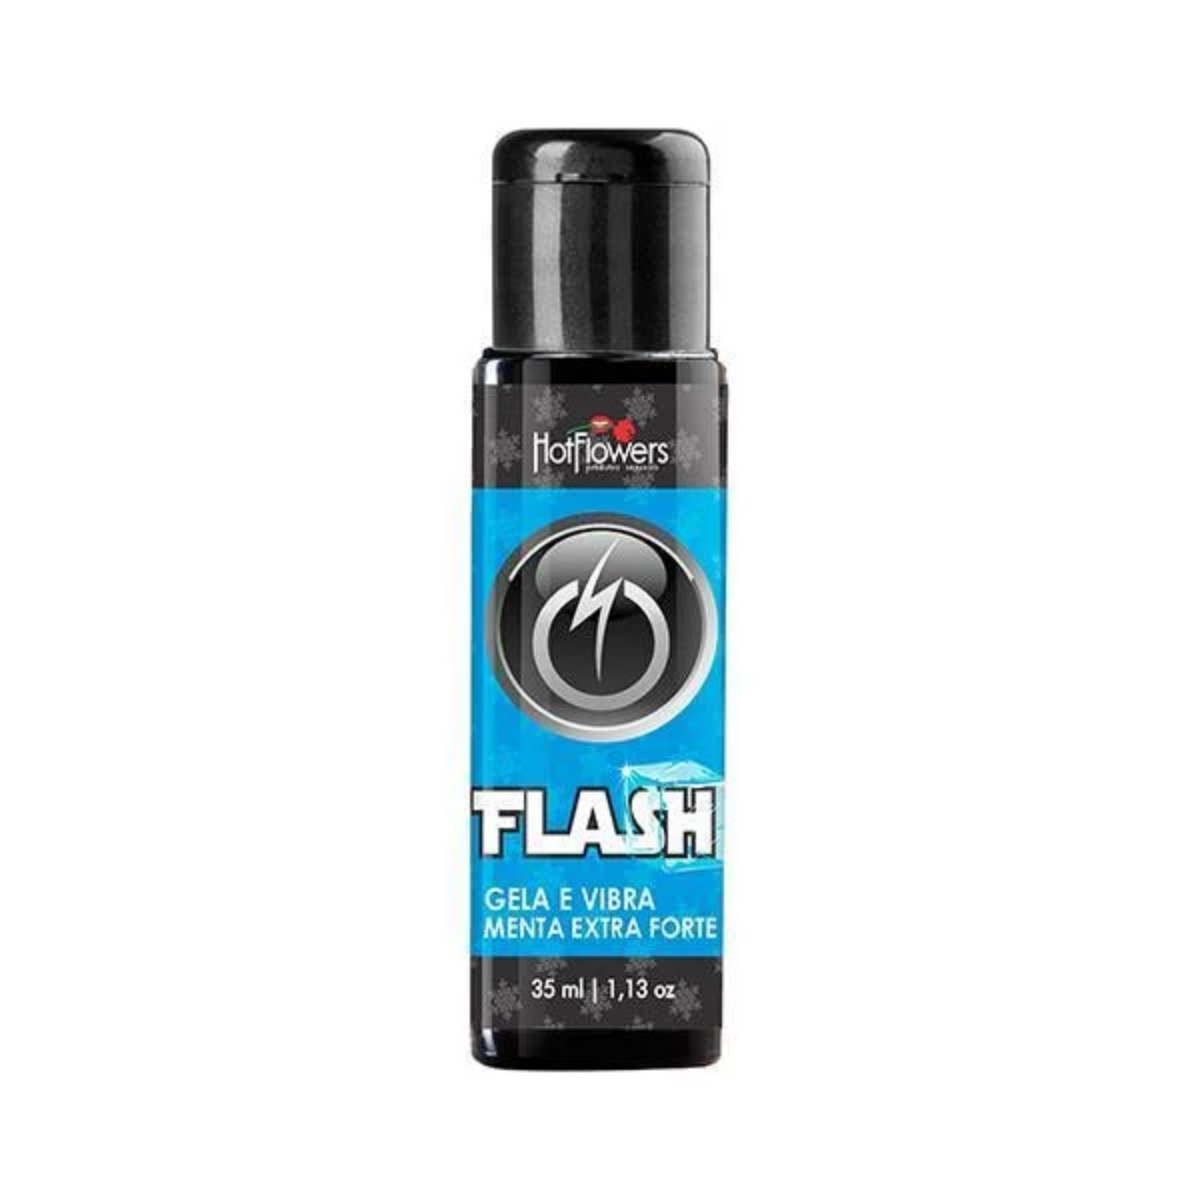 FLASH MENTA EXTRA FORTE HOT FLOWERS